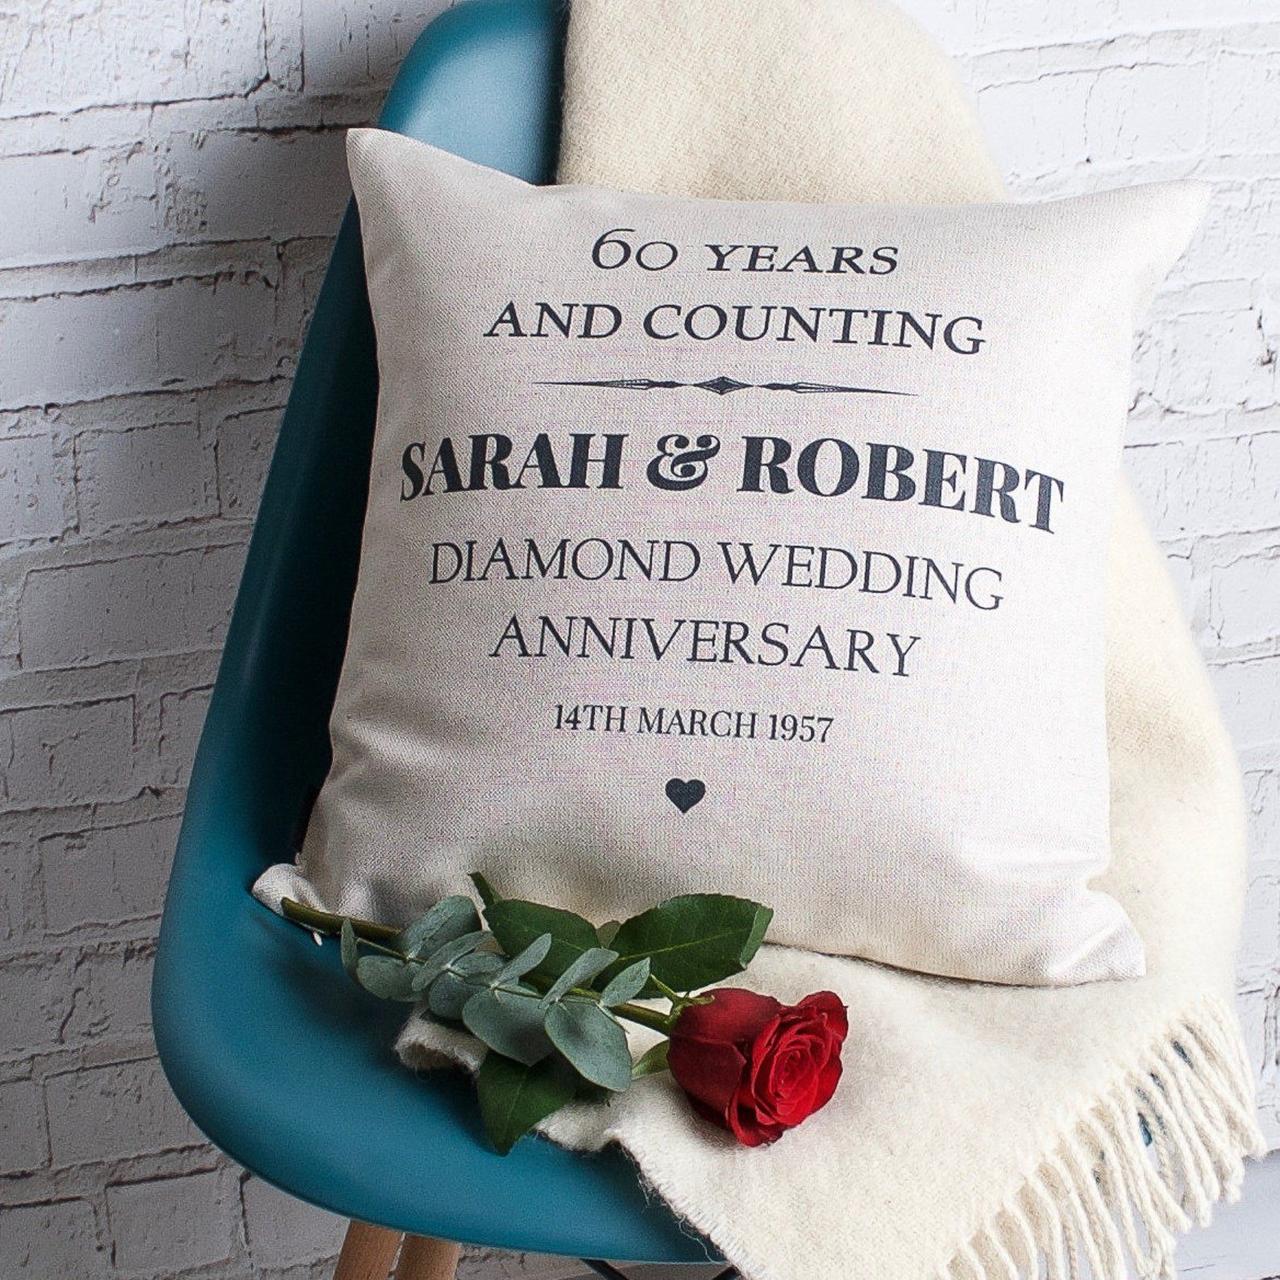 The Best 60-Year Anniversary Gift Ideas - 2021 Edition